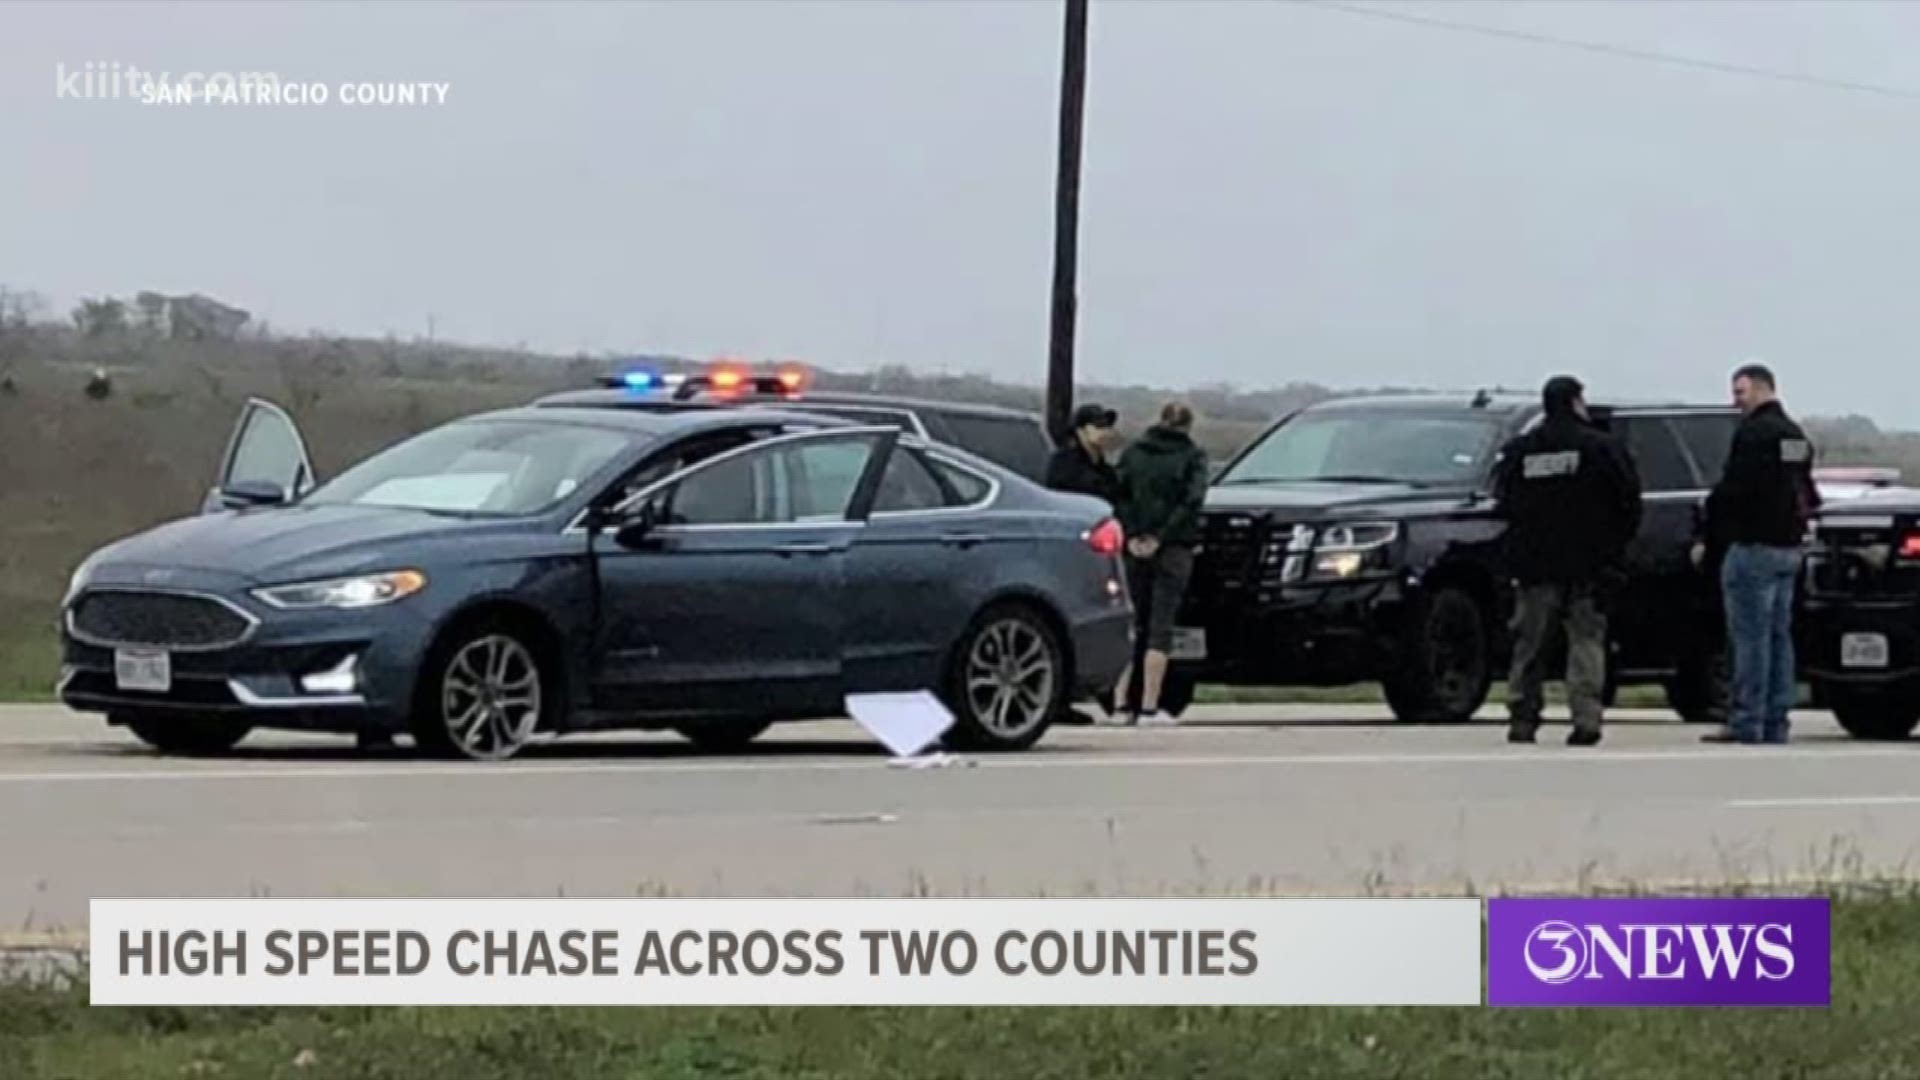 Police say the chase ended after officers were able to deploy a spike strip that brought the Ford sedan to a halt on U.S. 77, north of Sinton.